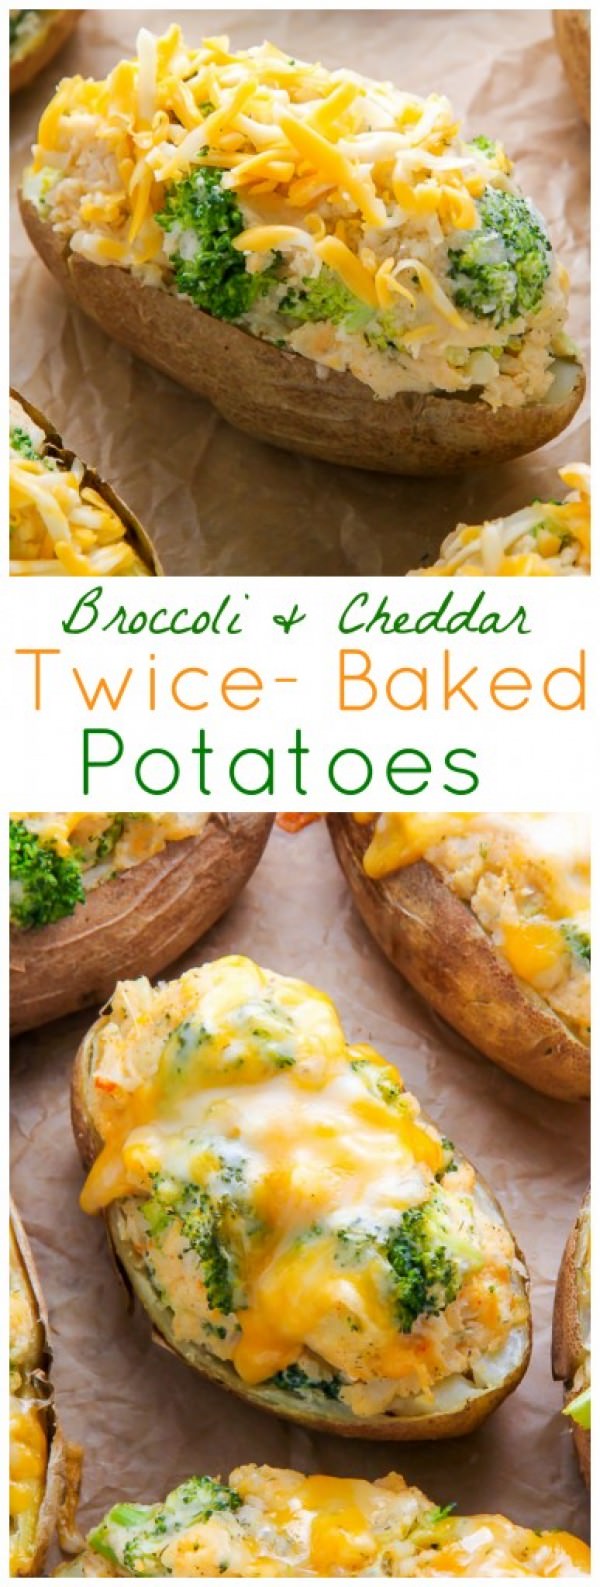 Broccoli and Cheddar Twice-Baked Potatoes ⋆ Food Curation